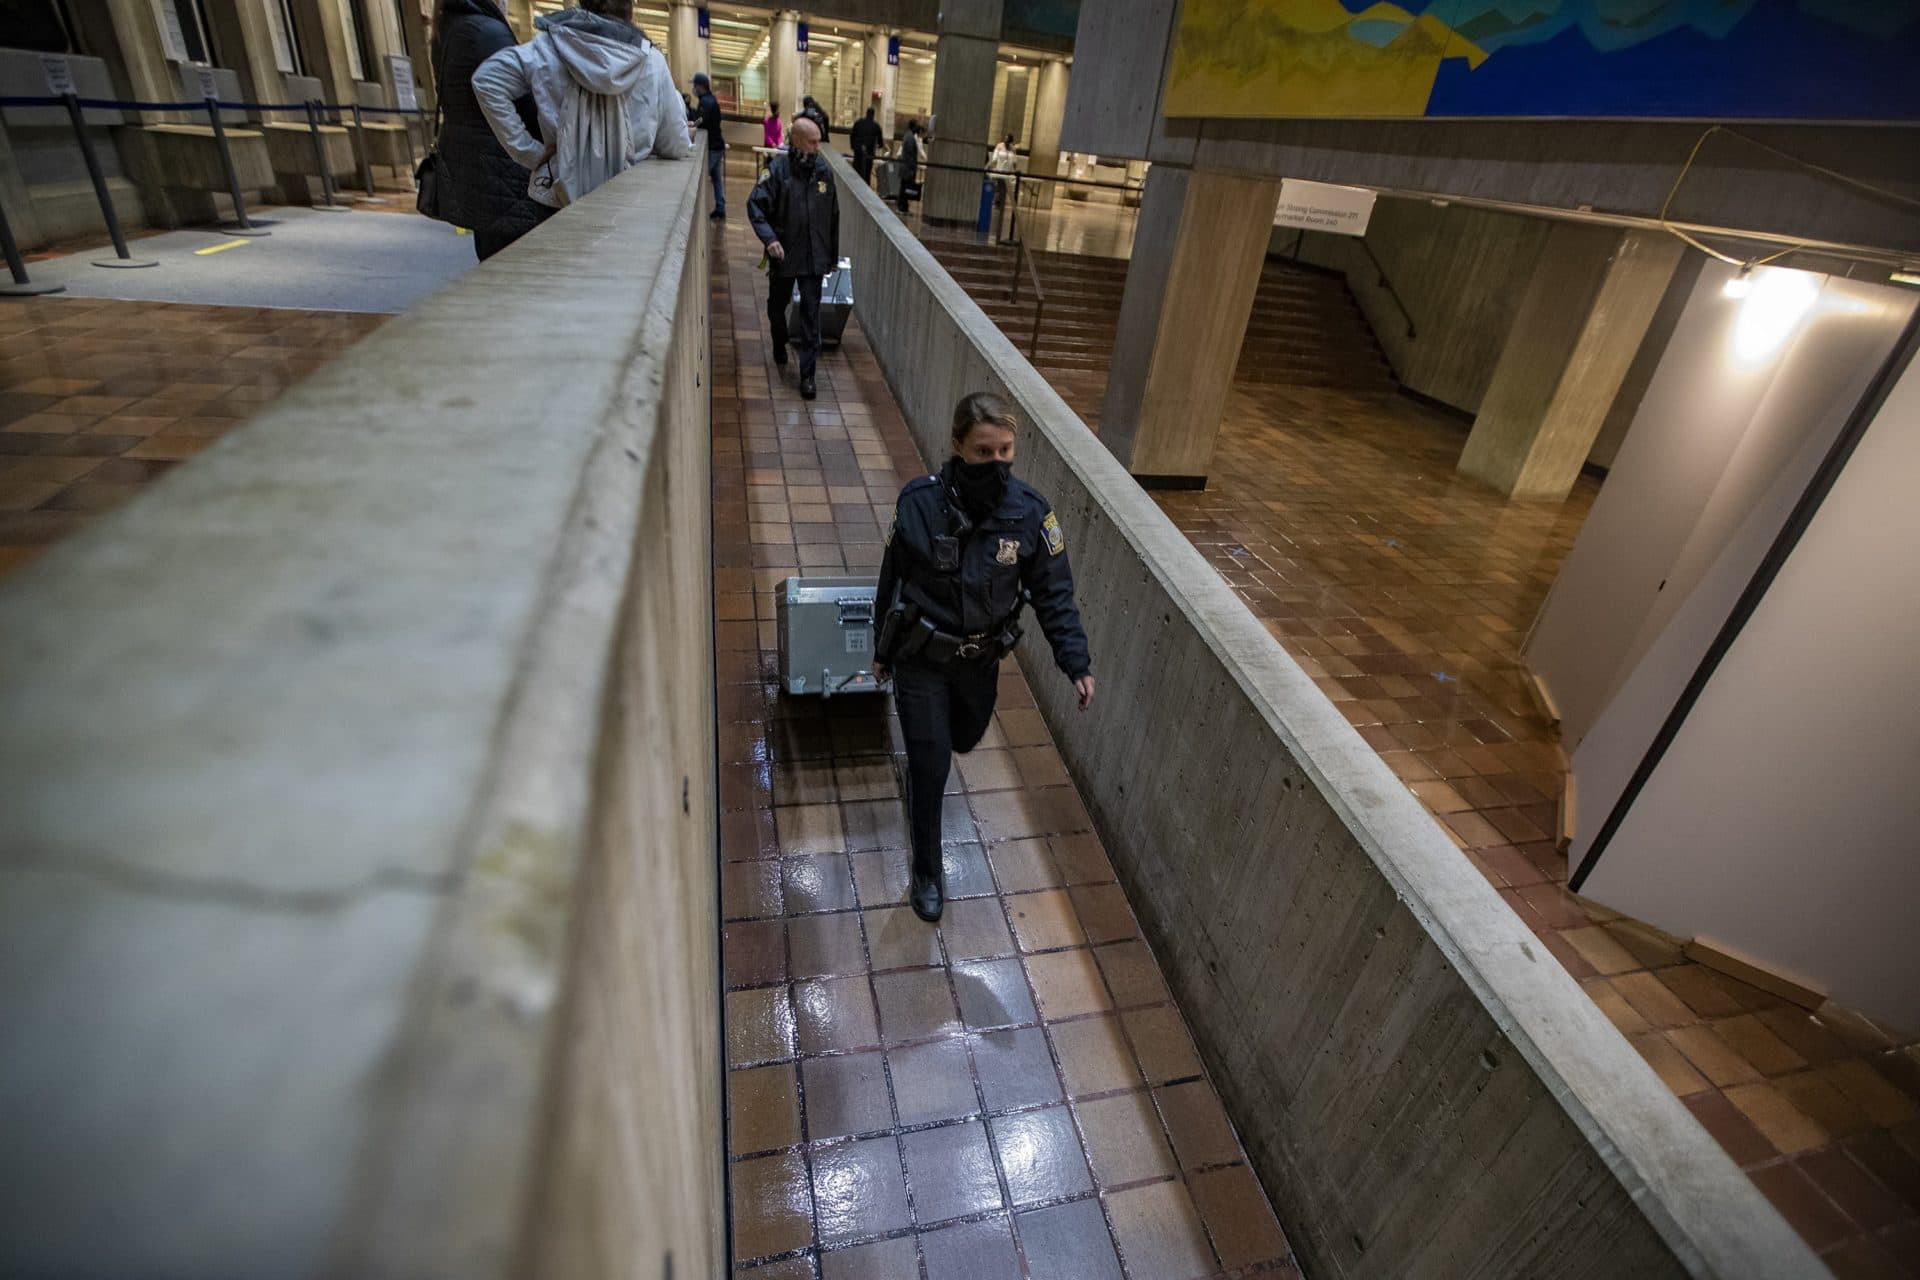 Boston Police officers with trunks of ballots head down a ramp toward a vault located in the lower levels of City Hall. (Jesse Costa/WBUR)